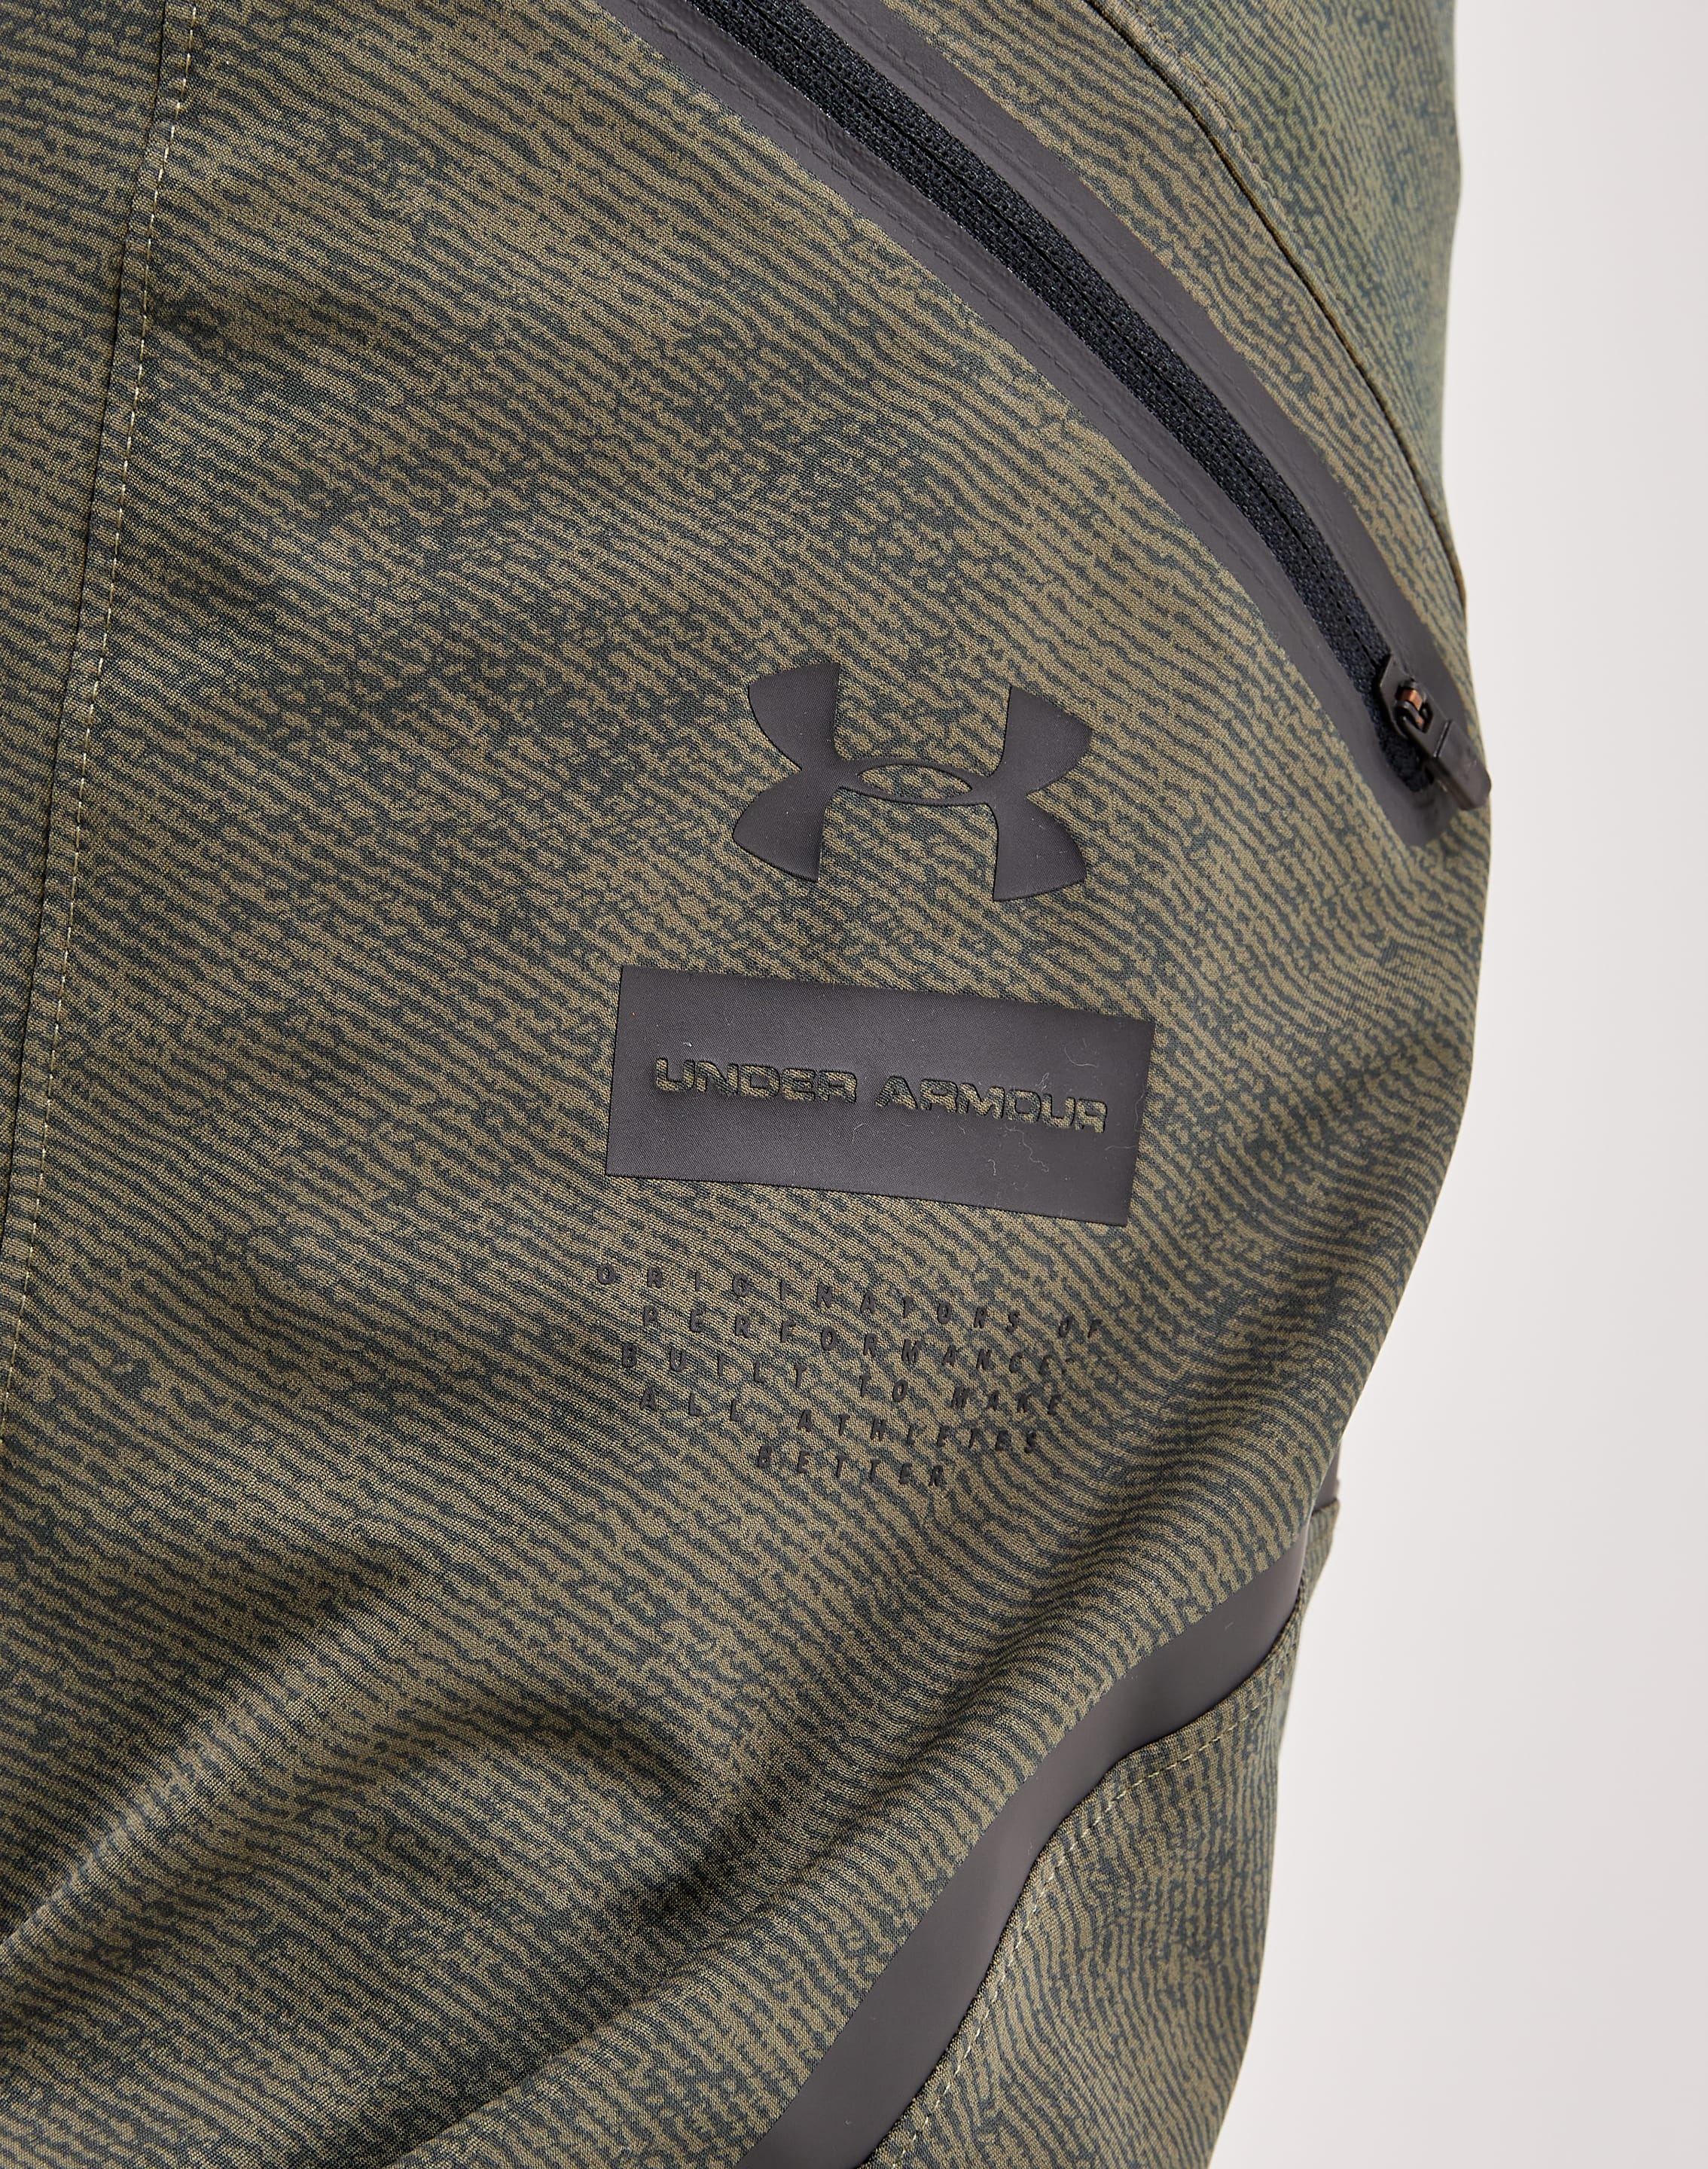 Under Armour Unstoppable Cargo Pants – DTLR